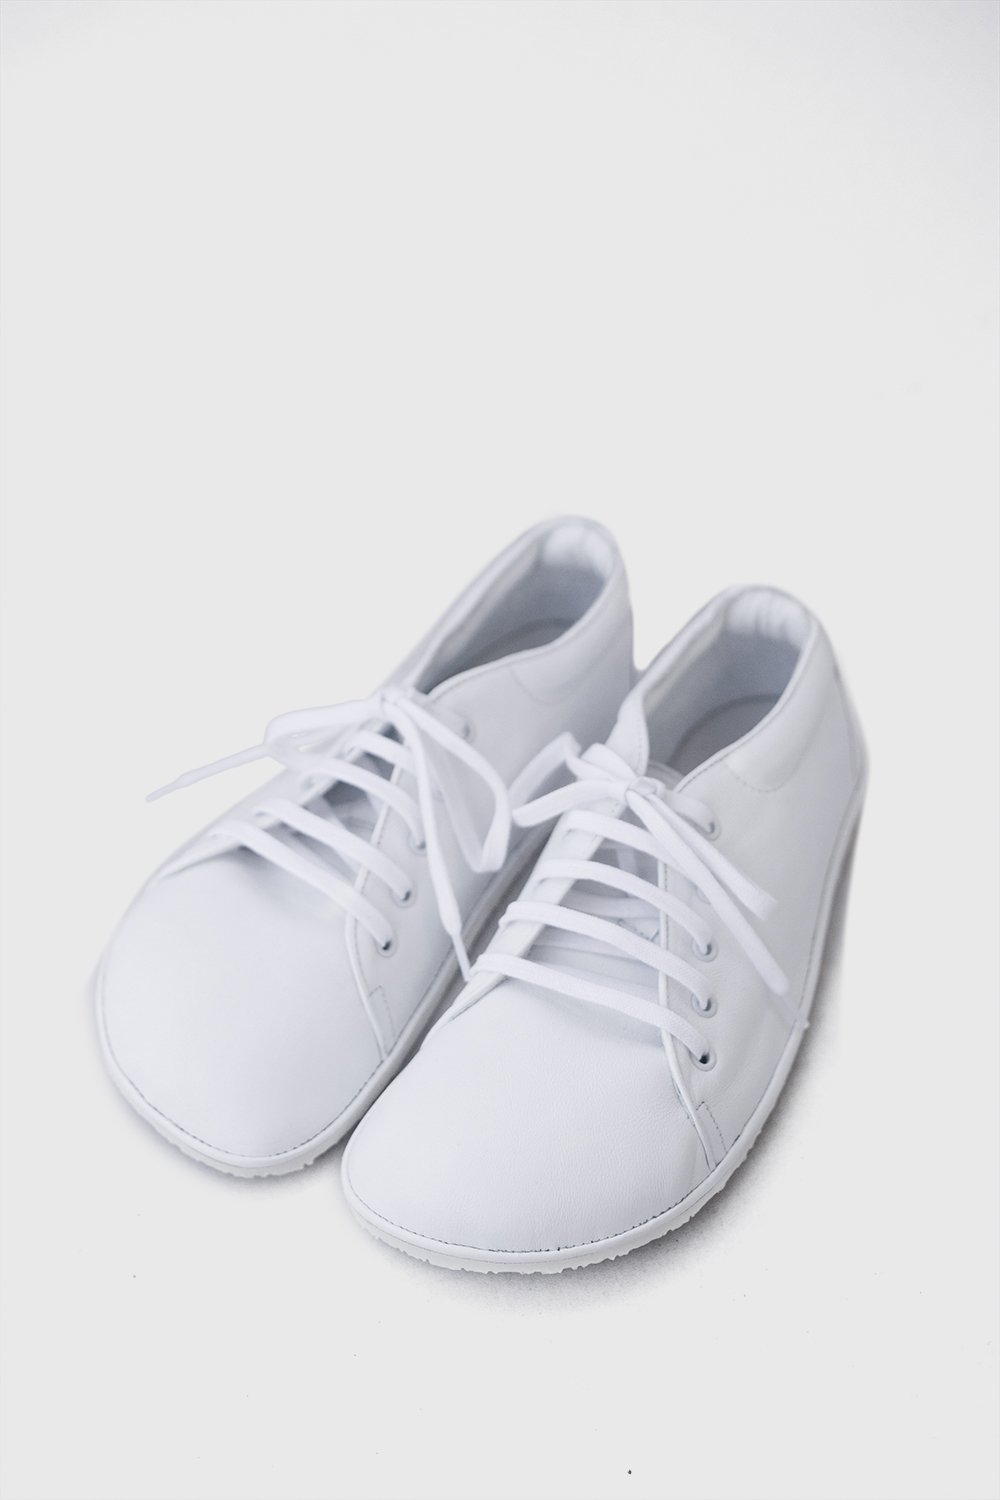 Image of Barefoot Sneakers in Matte White - 39 EU - Ready to ship